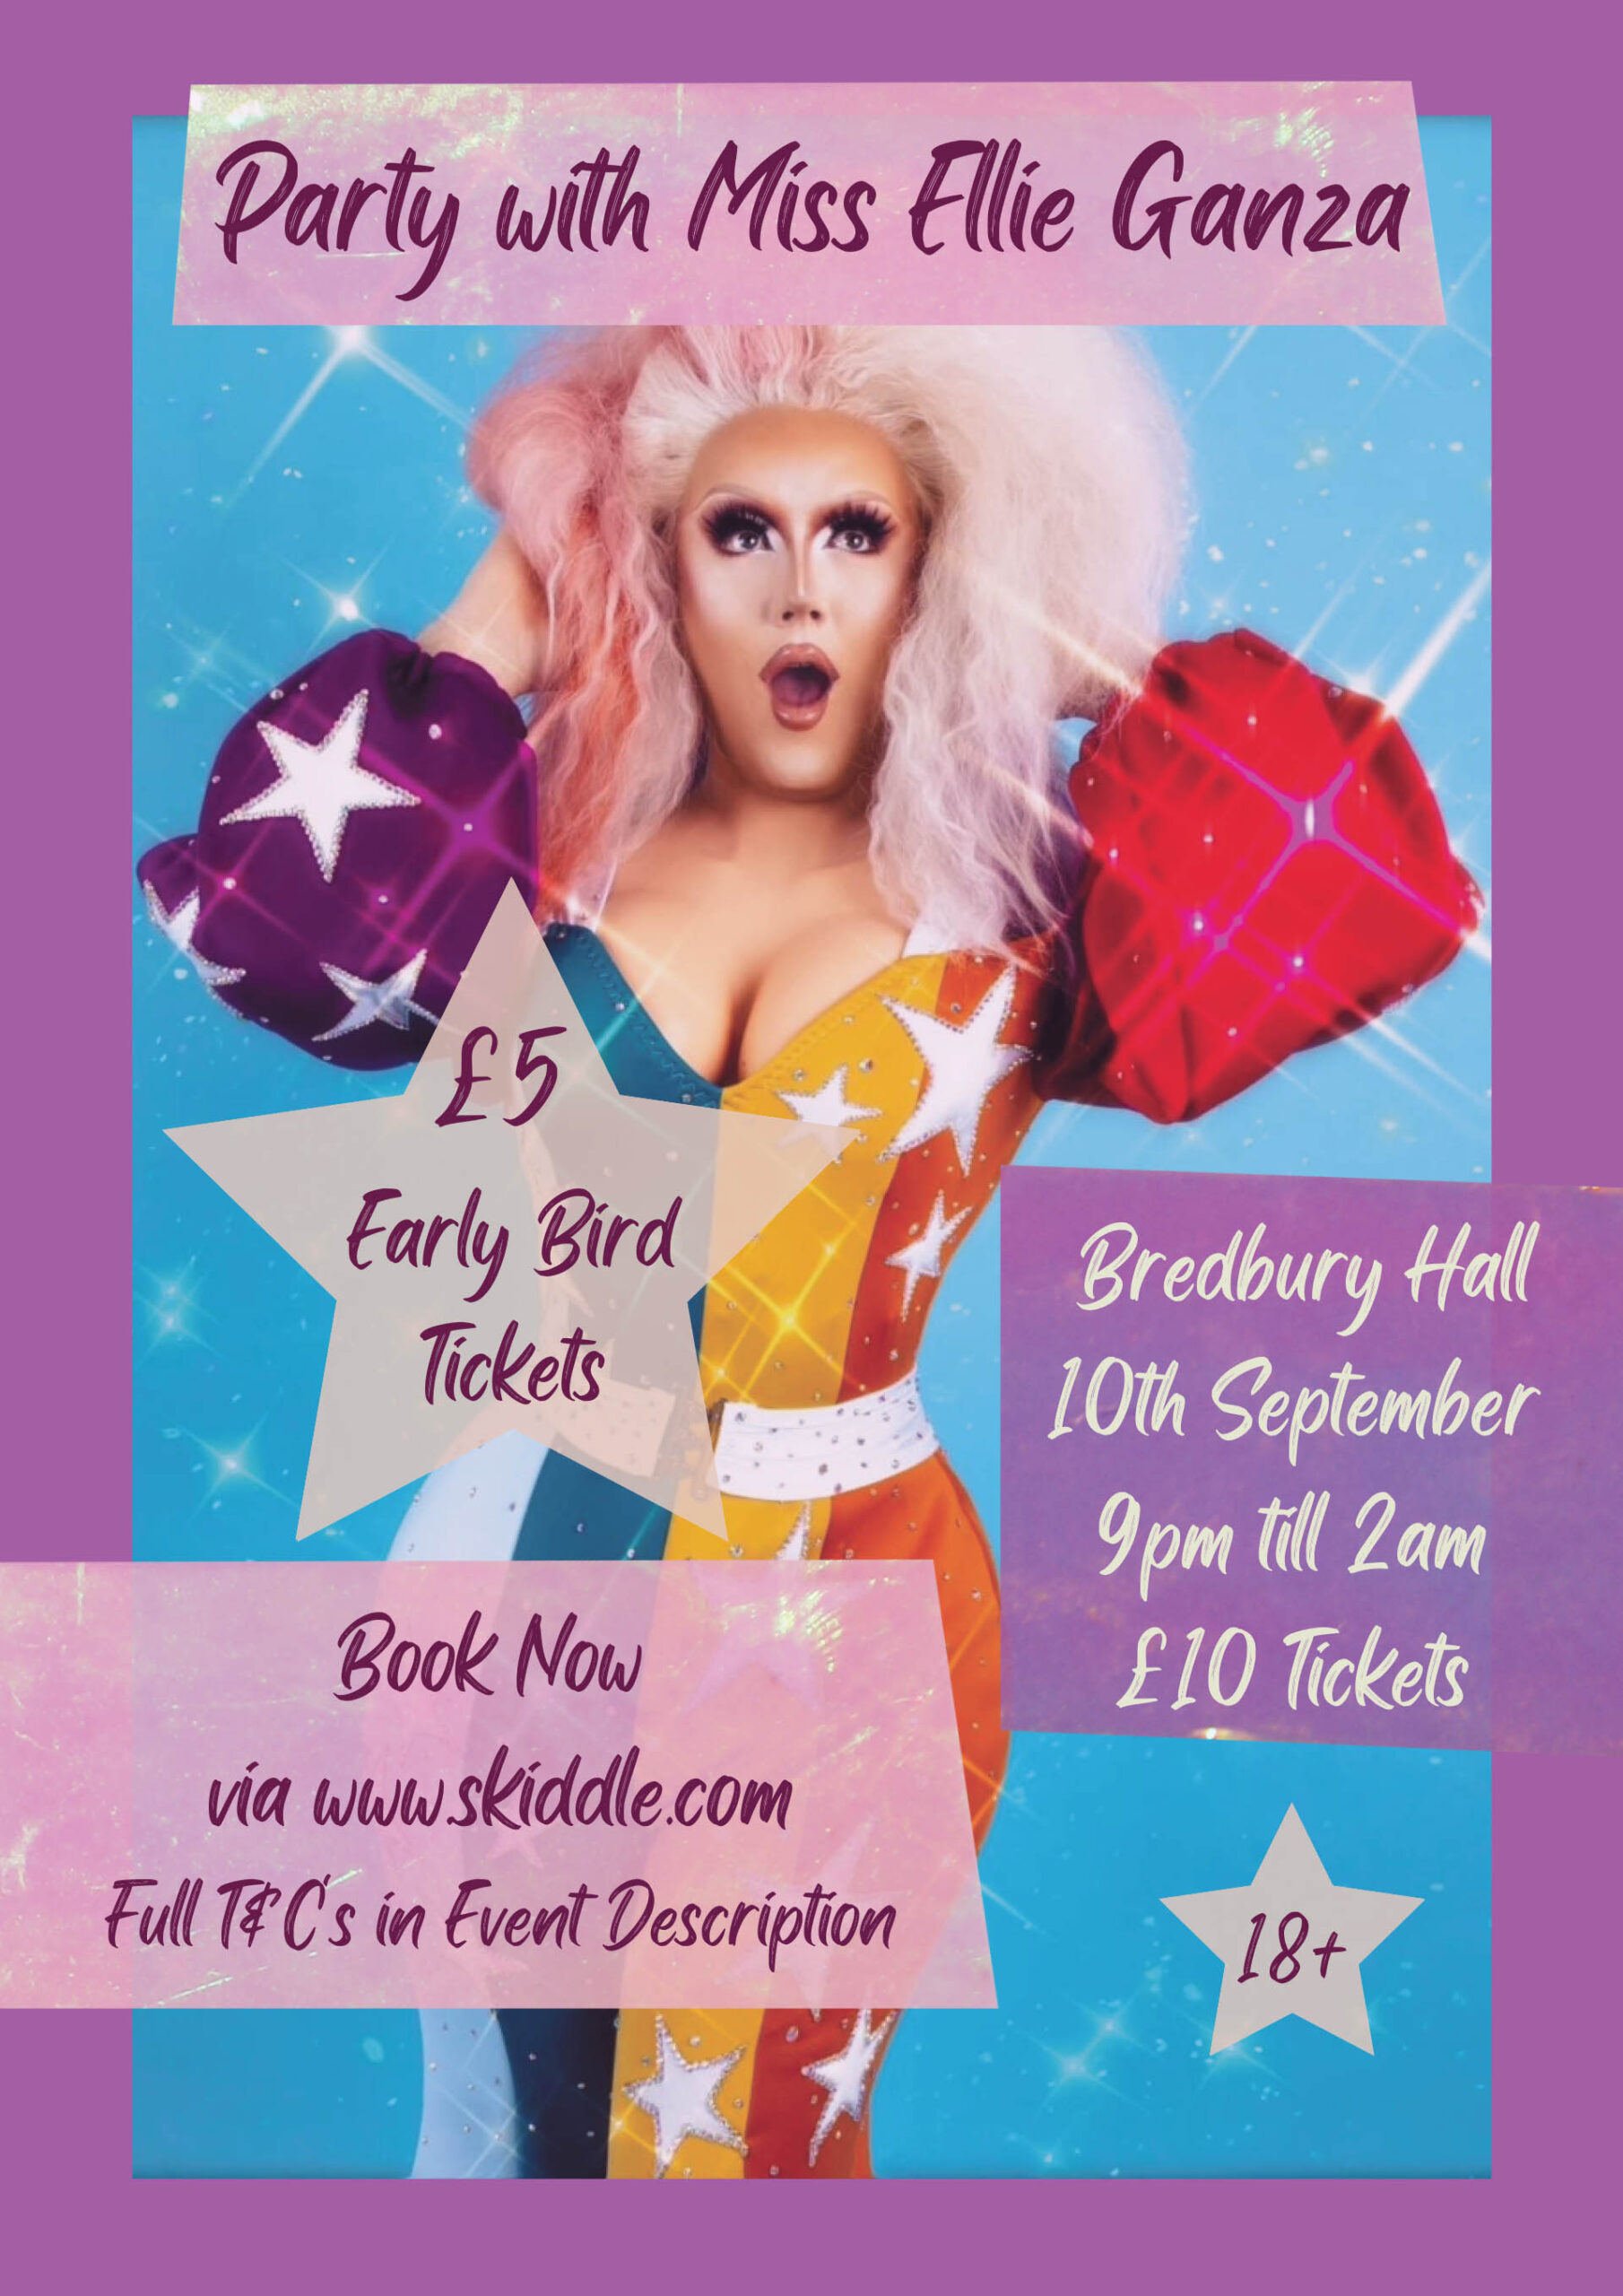 Party with Miss Ellie Ganza at Bredbury Hall Hotel Stockport